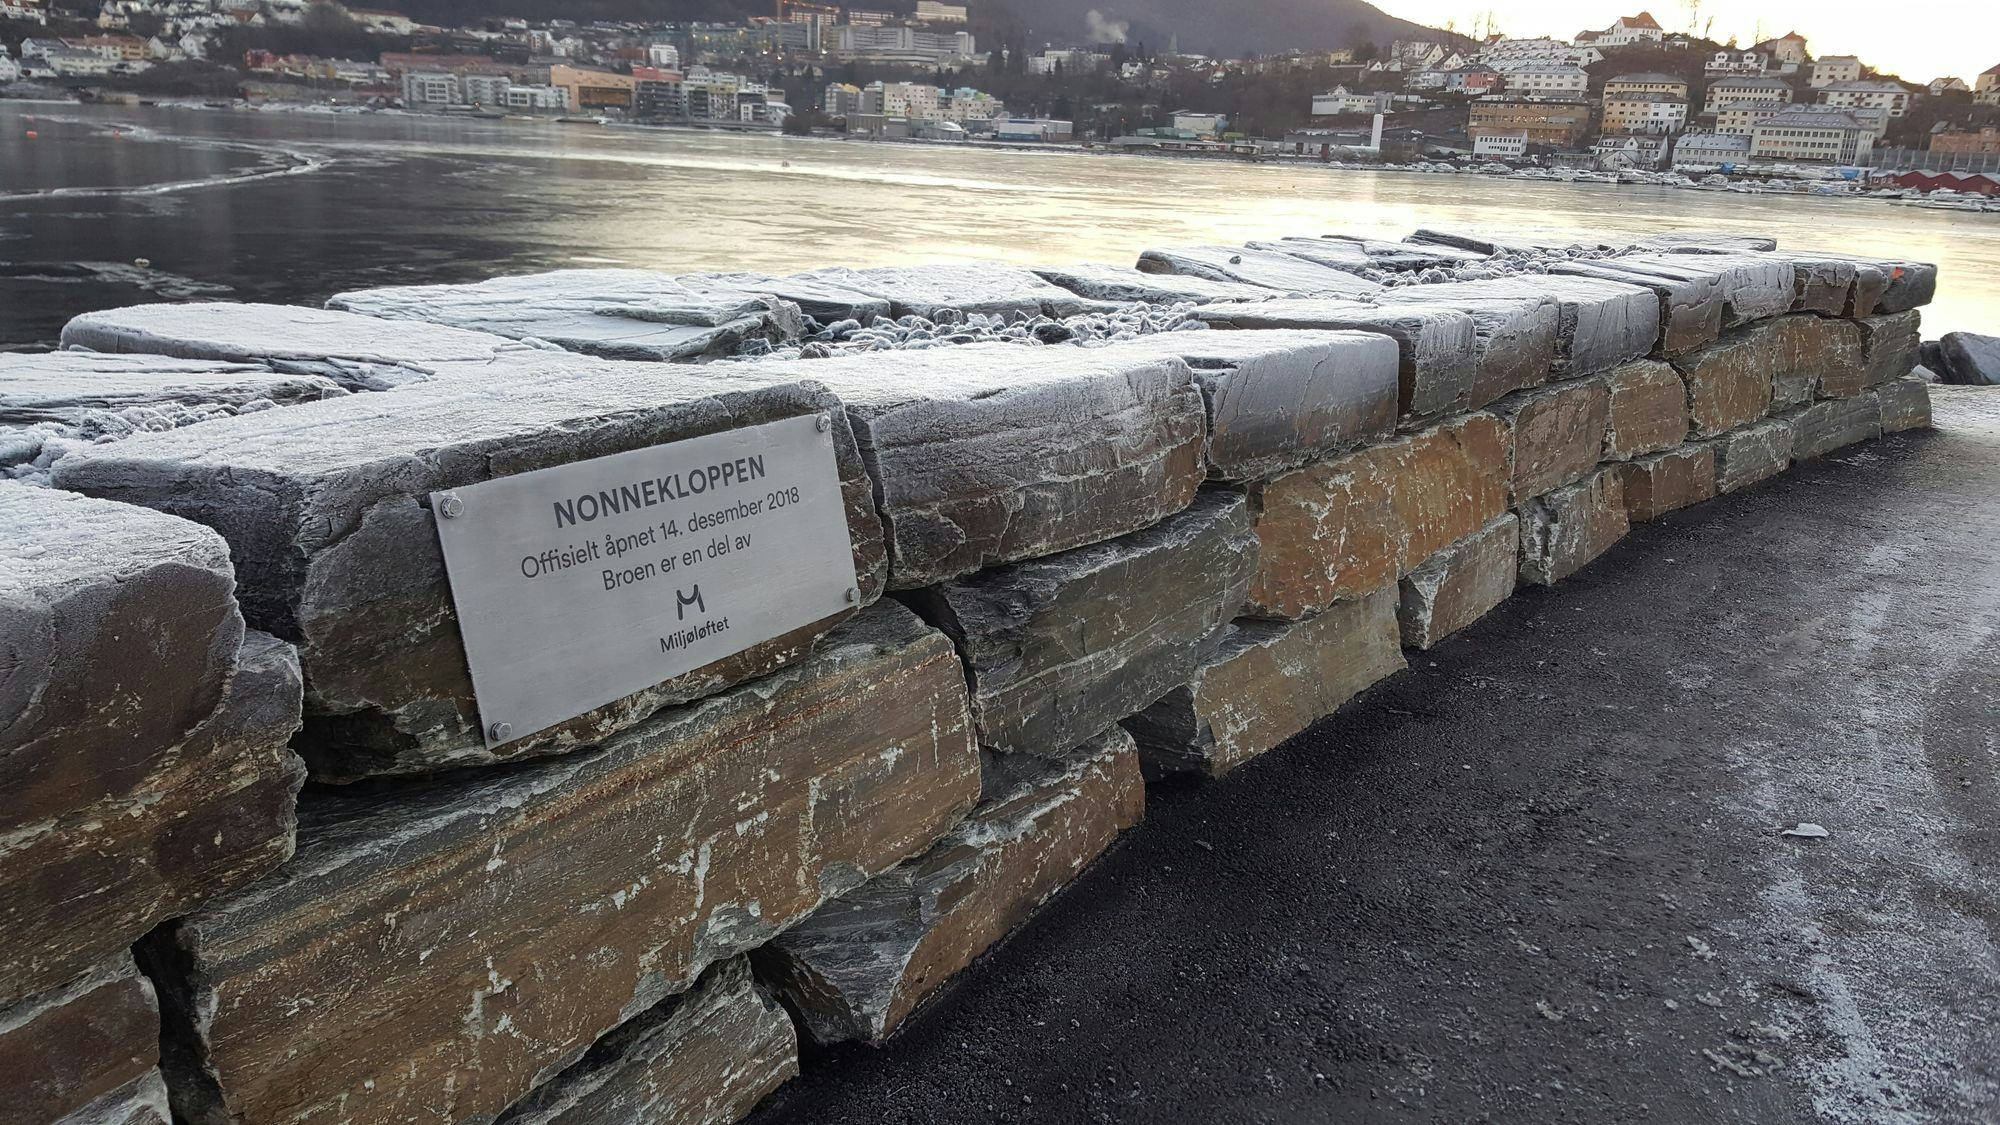 Stone barrier with steel plaque reading "NONNEKLOPPEN" and a view of a city across the water in the background